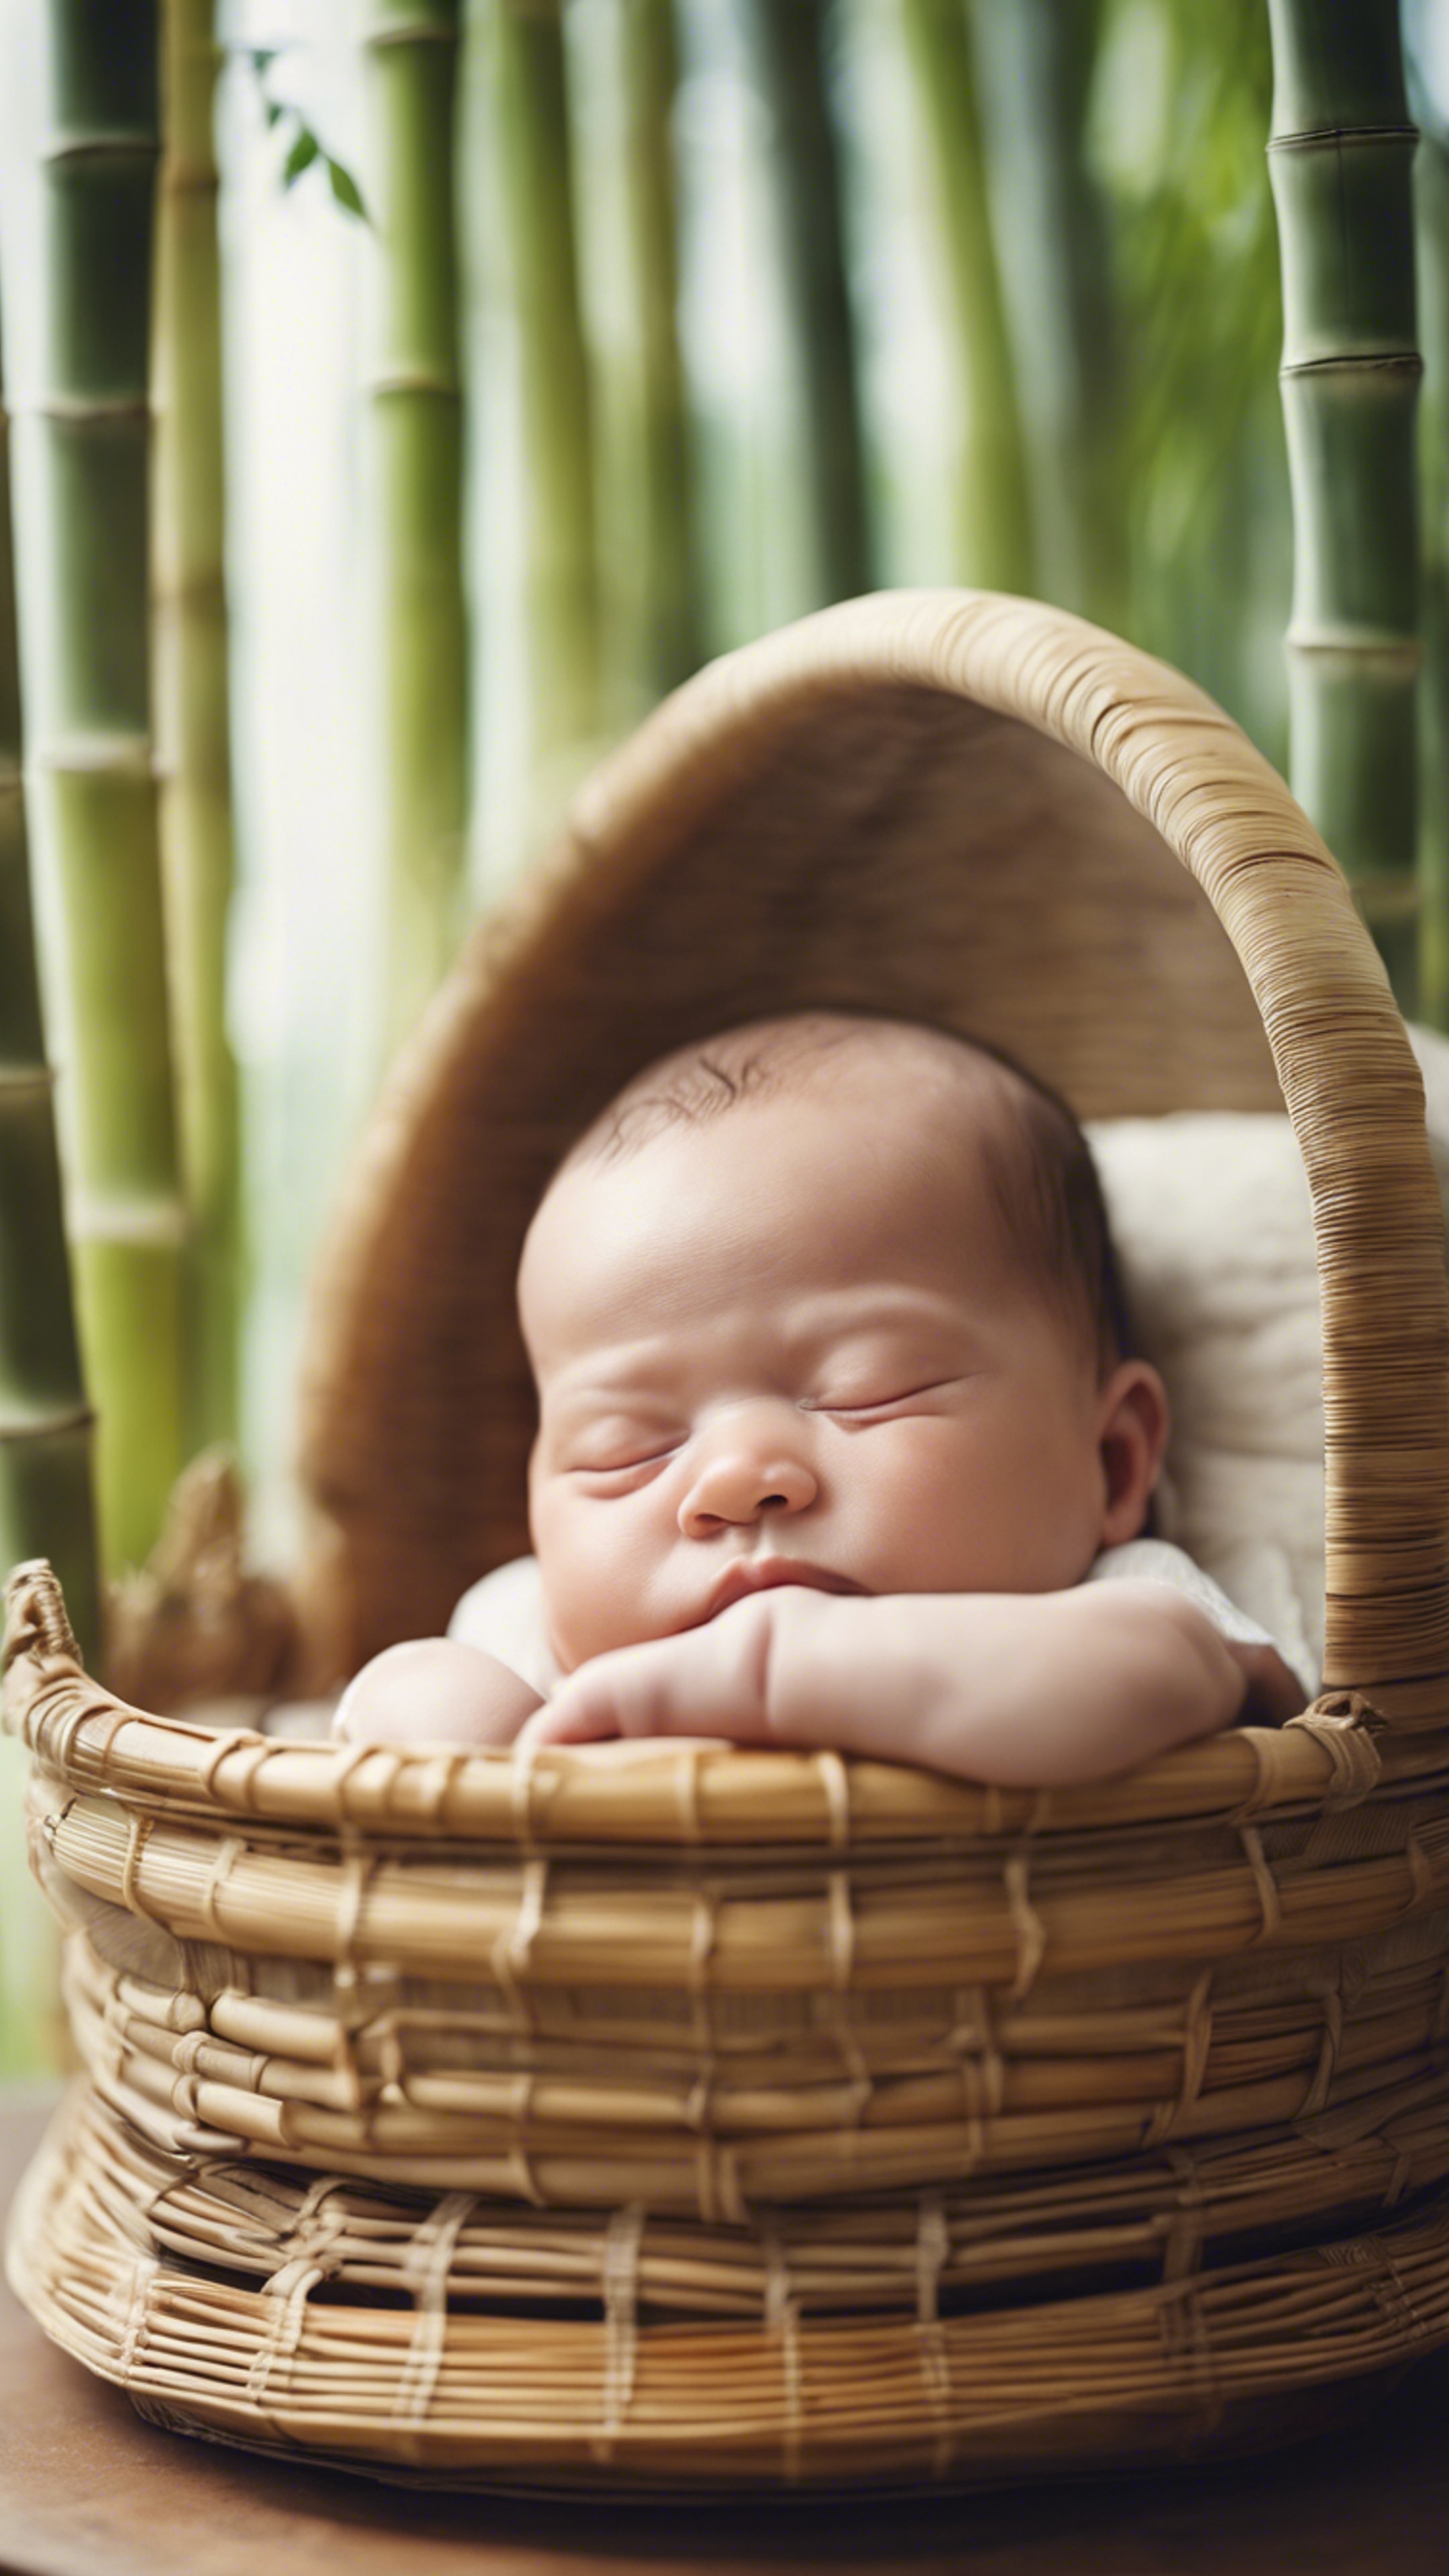 A newborn baby sleeping peacefully in a bamboo cradle. Wallpaper[aa600c14ac9b4a439482]